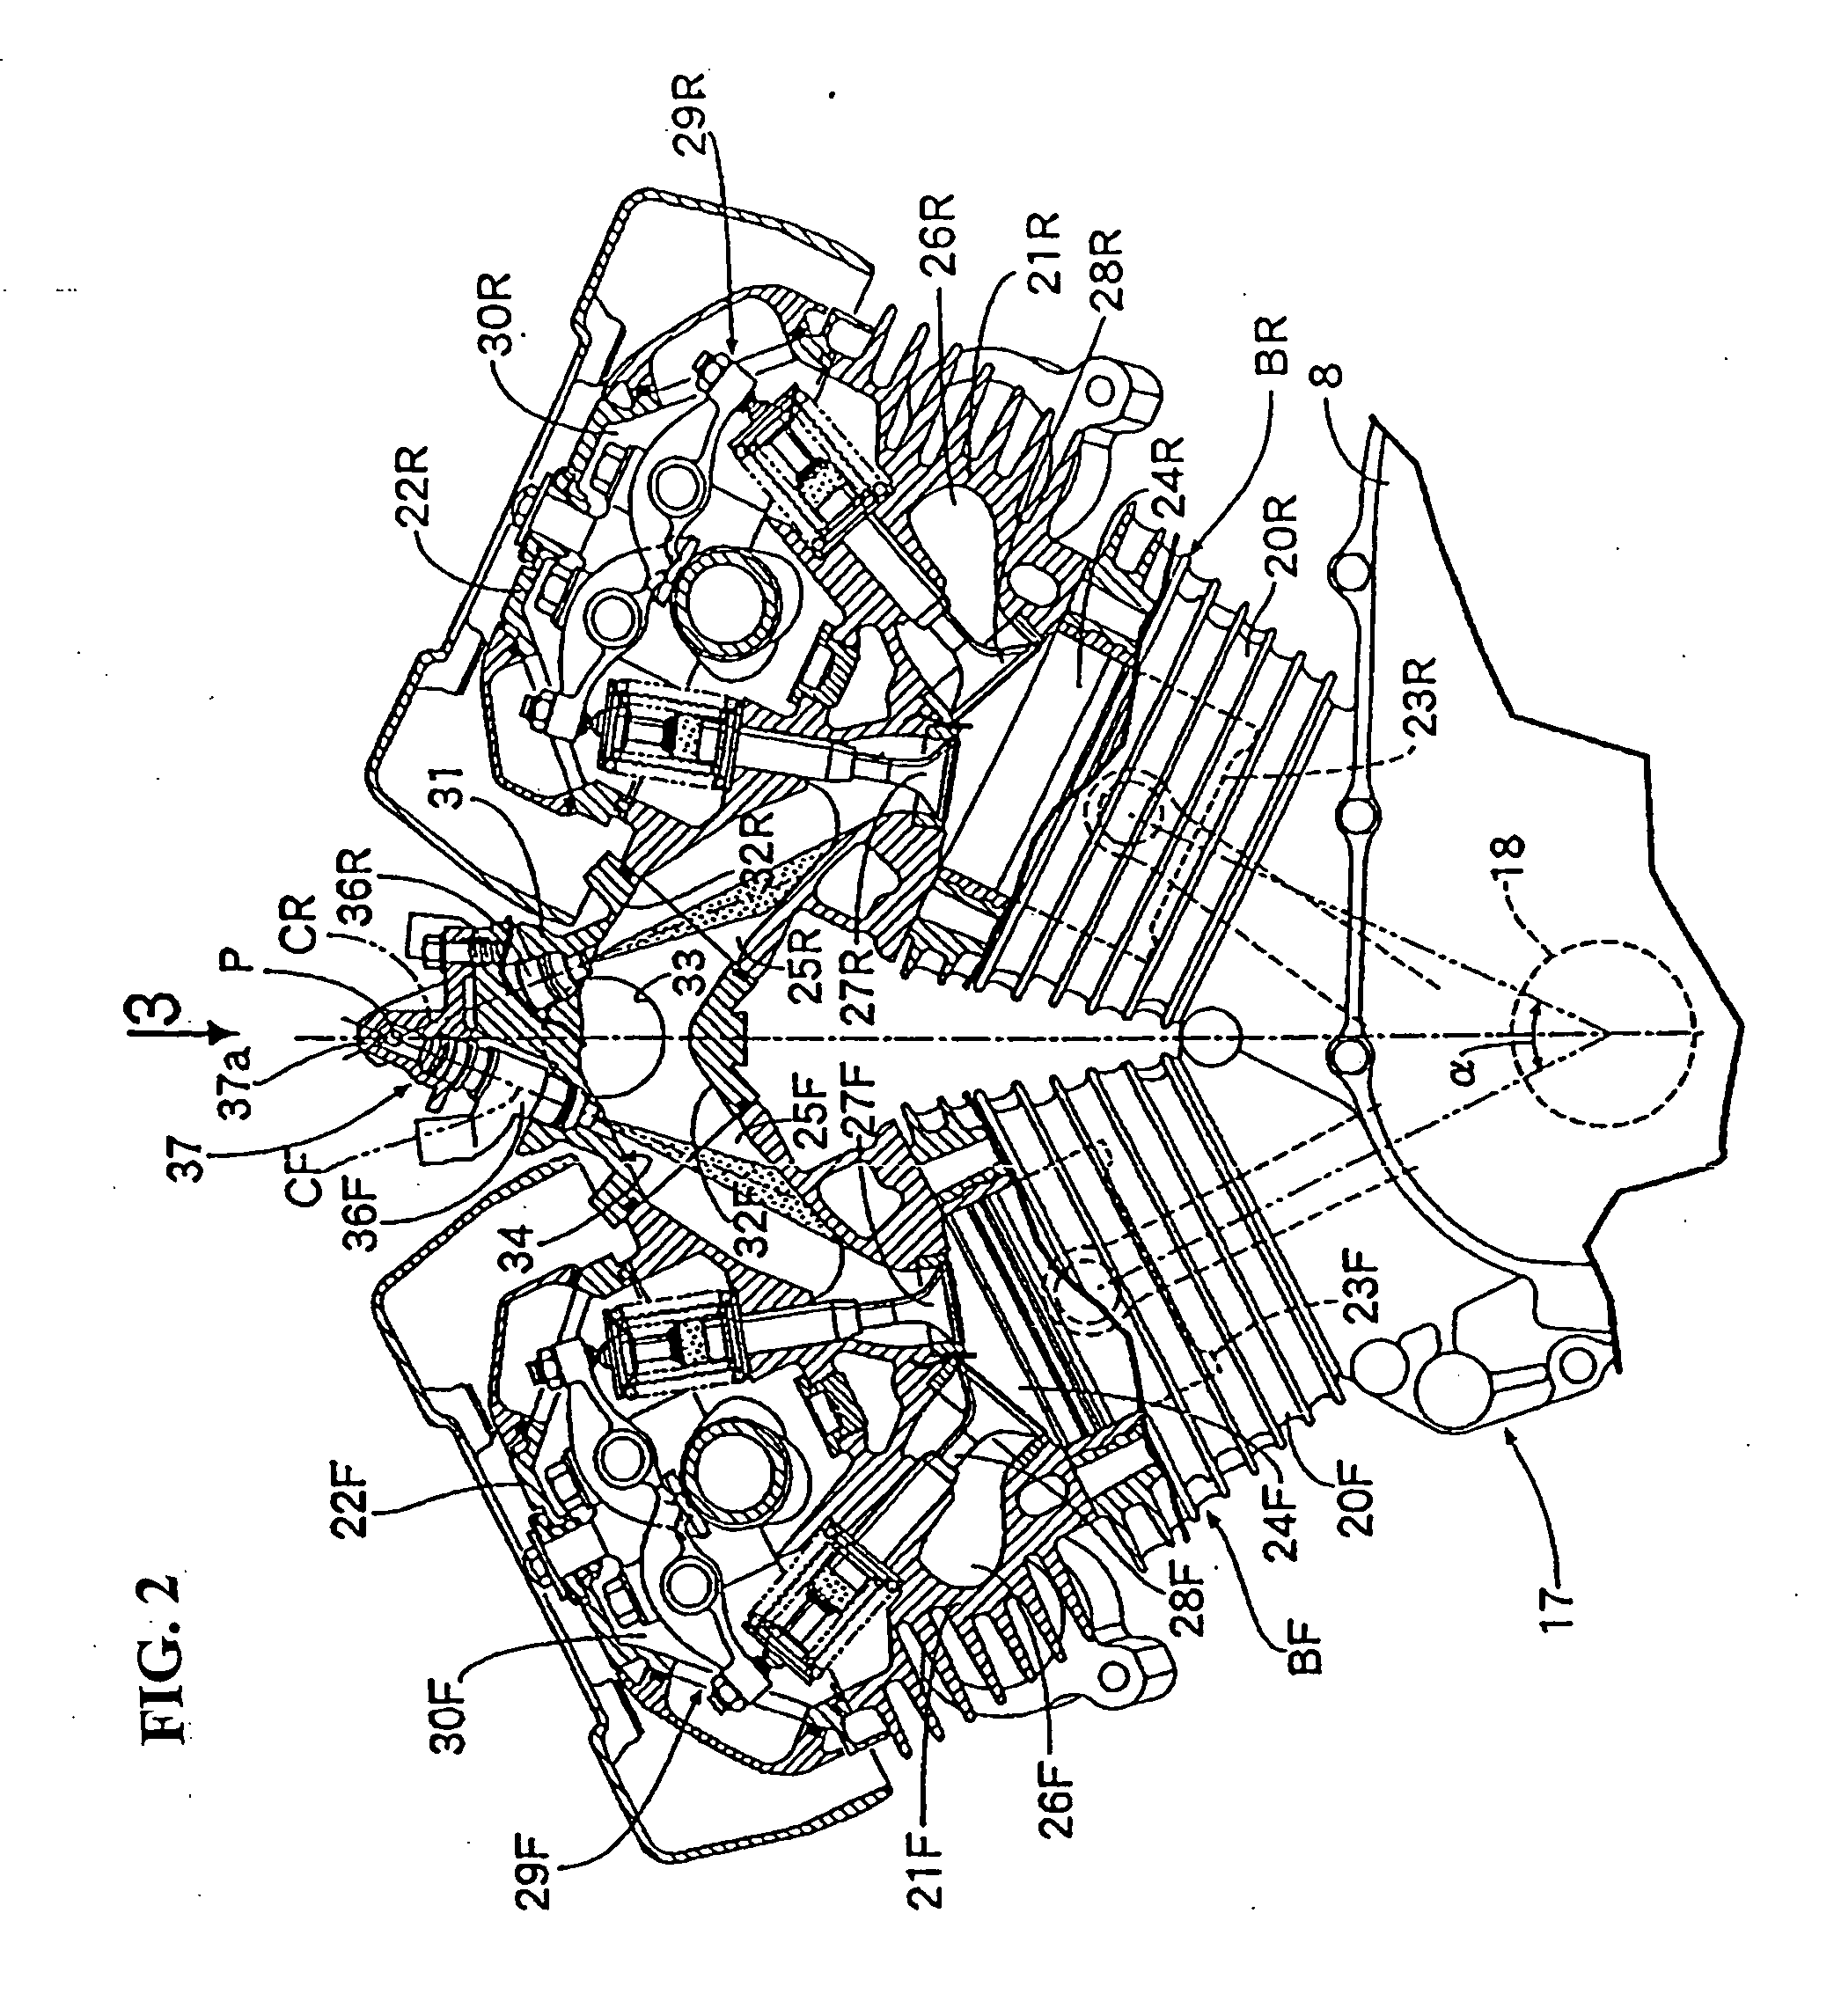 Fuel routing structure for a V-type engine